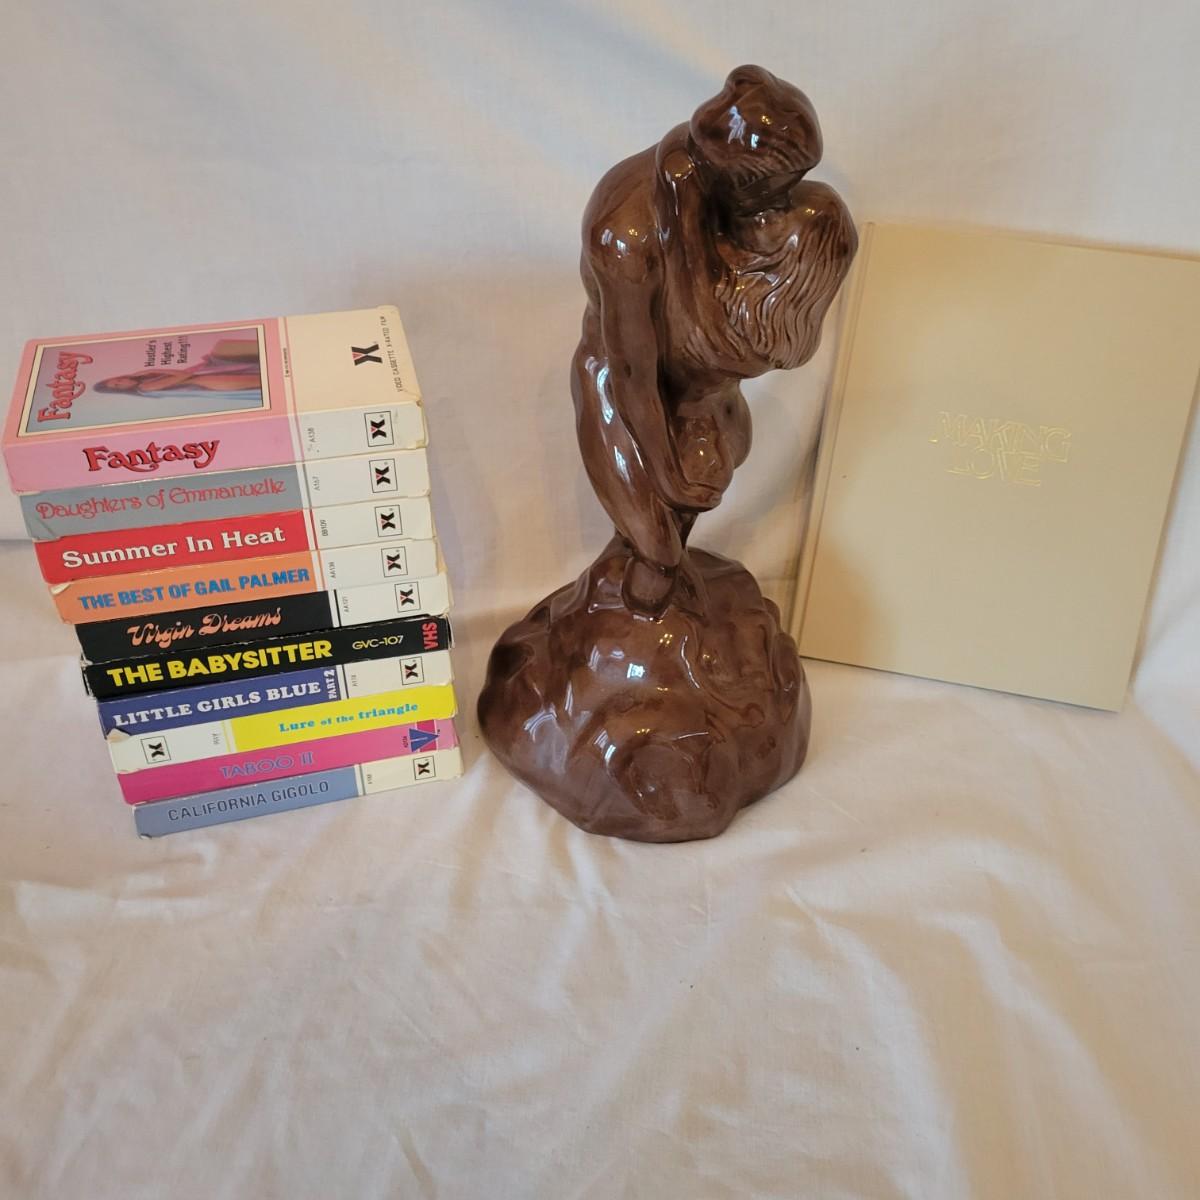 Retro Erotic Art Book And Vhs Tapes Fr Dw